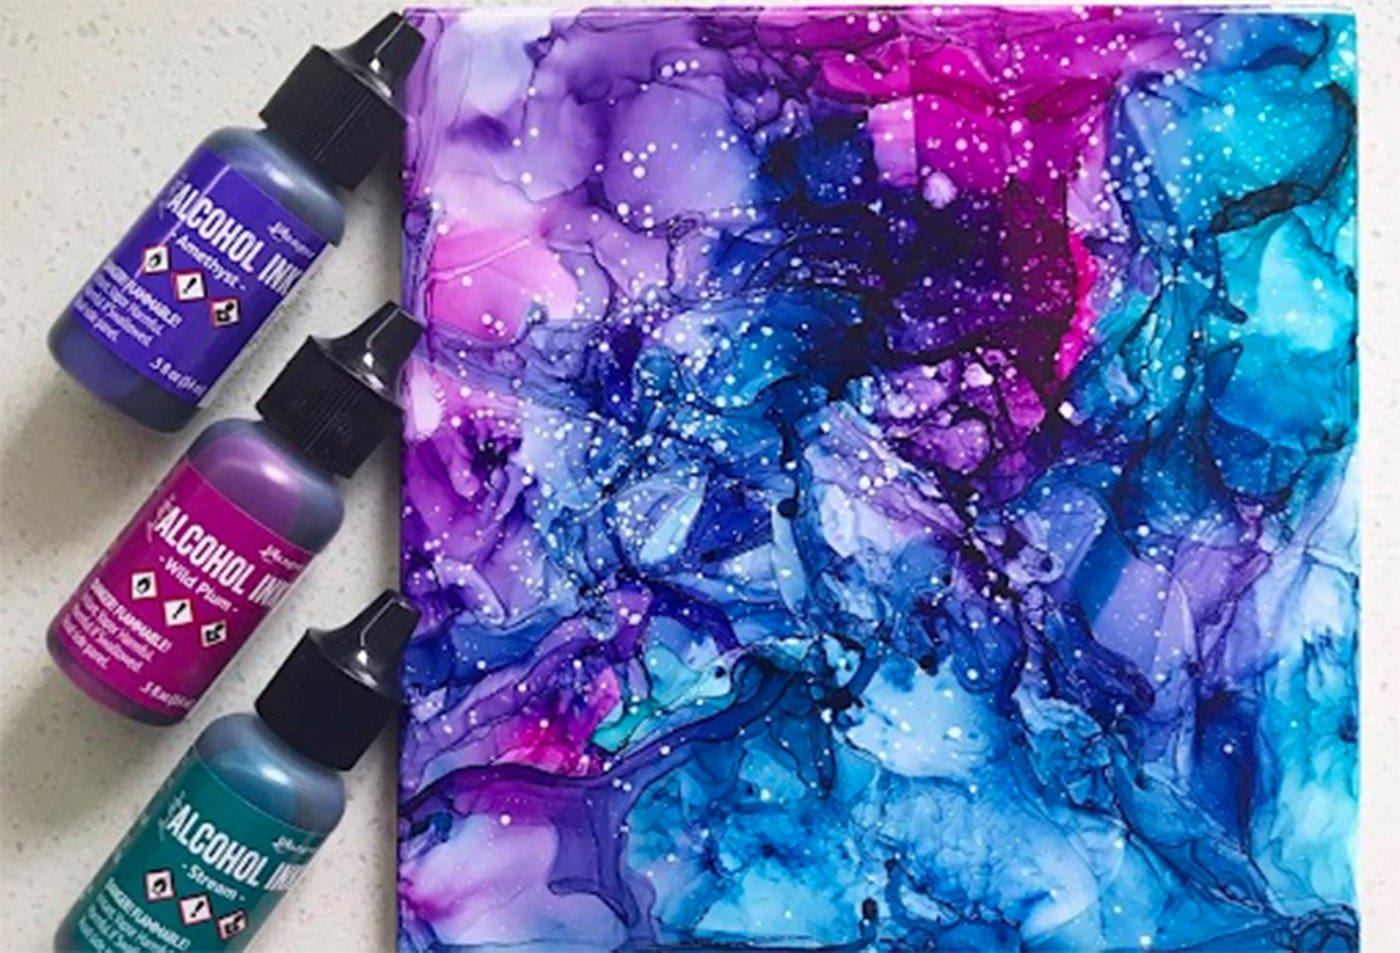 3 bottles of ink, purple, teal and pink on the left. And a finished alcohol ink with these colors on the right